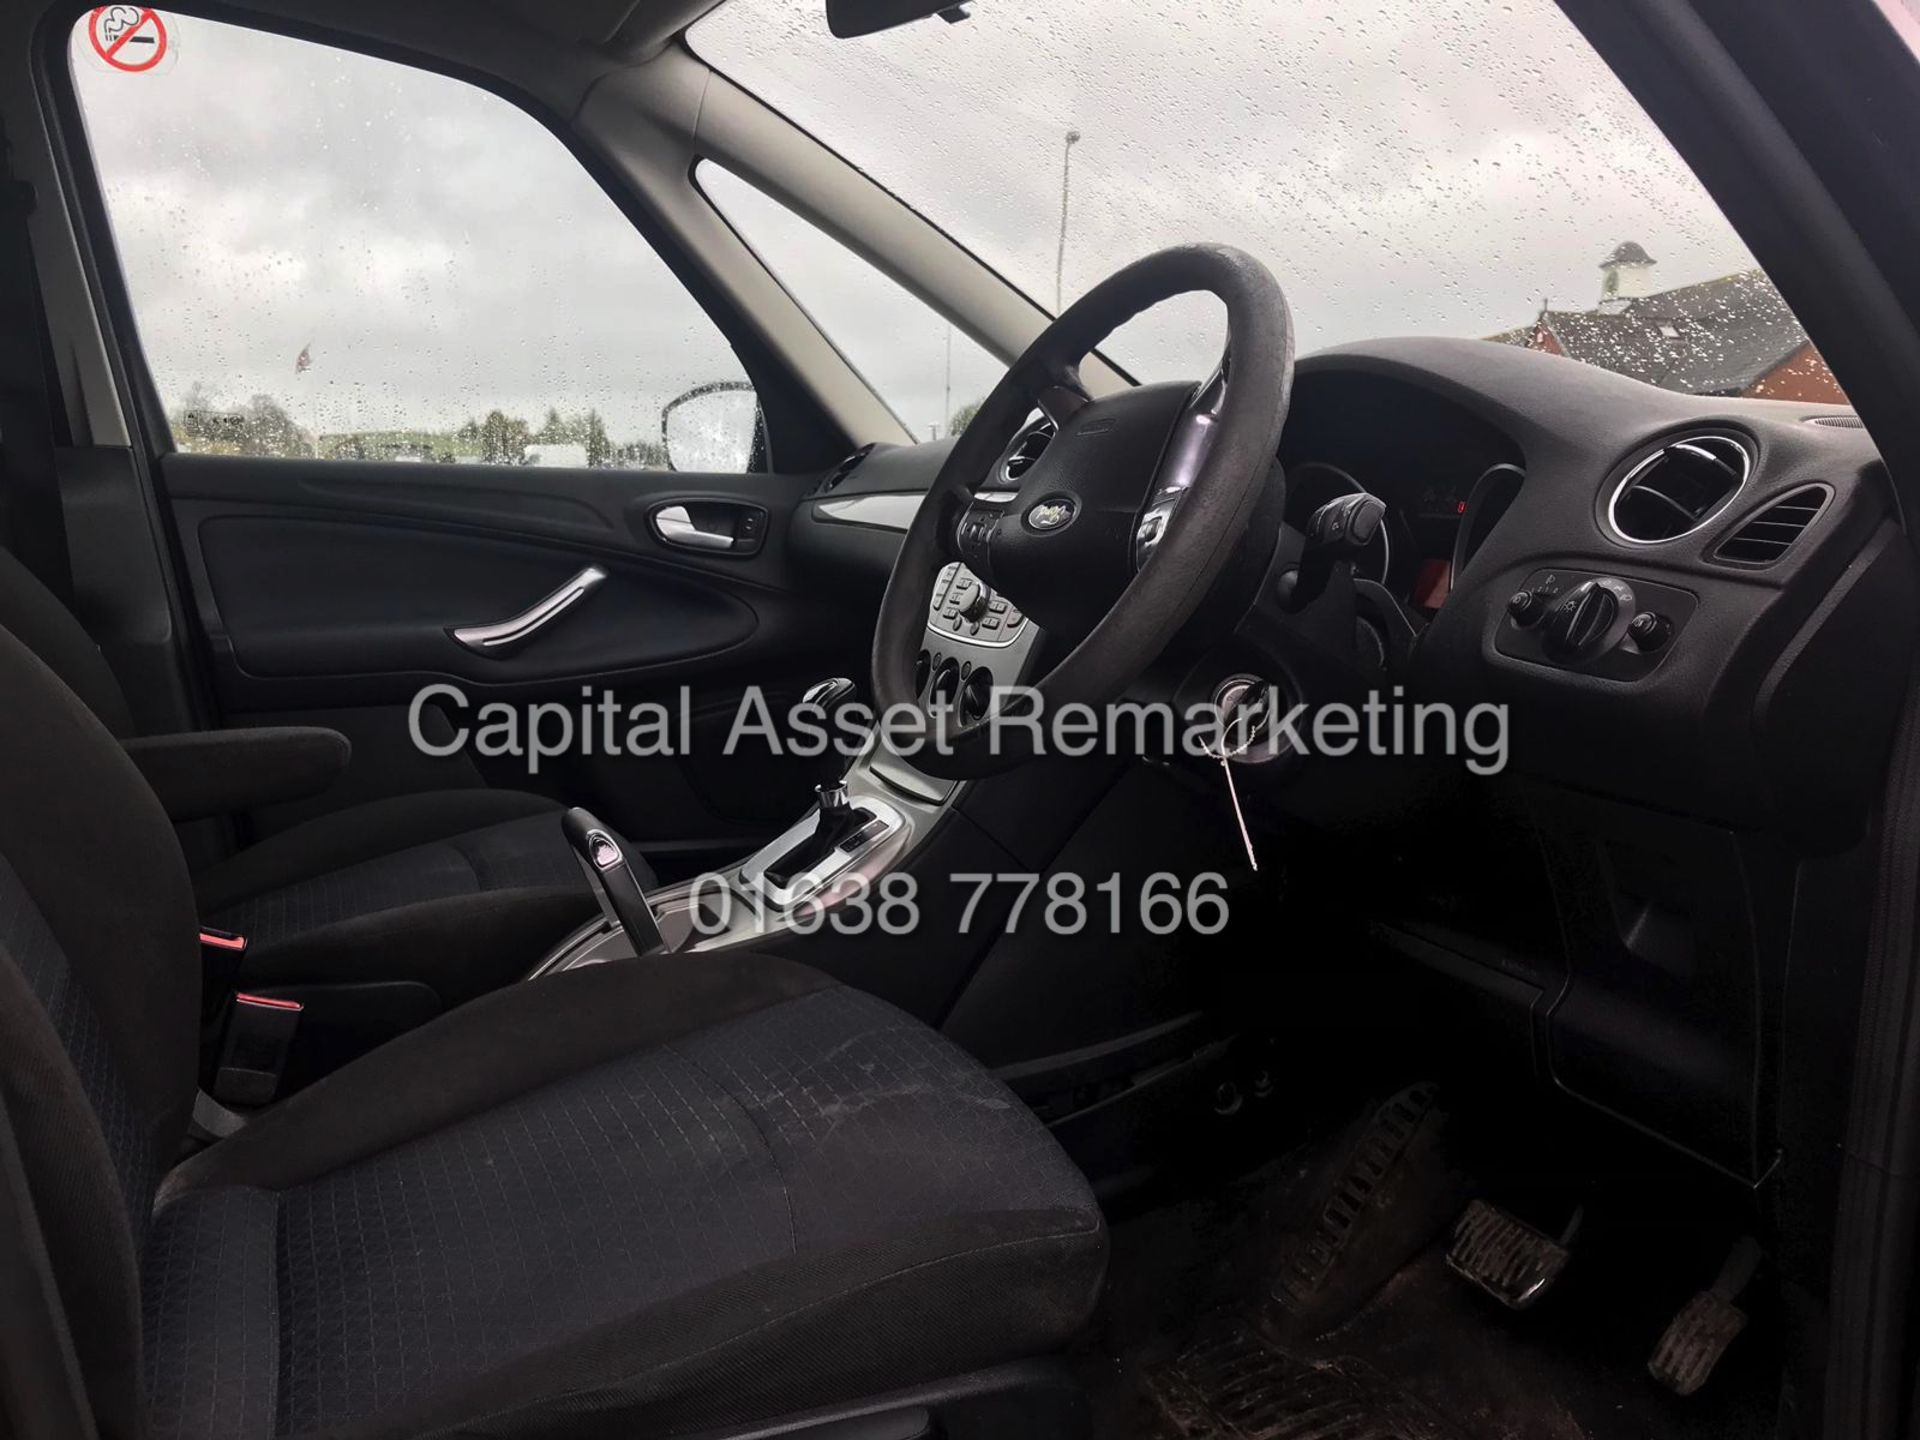 (ON SALE) FORD GALAXY 2.0TDCI "EDGE" 7 SEATER - 08 REG - AIR CON - 1 PREVIOUS OWNER - BLACK - Image 7 of 14